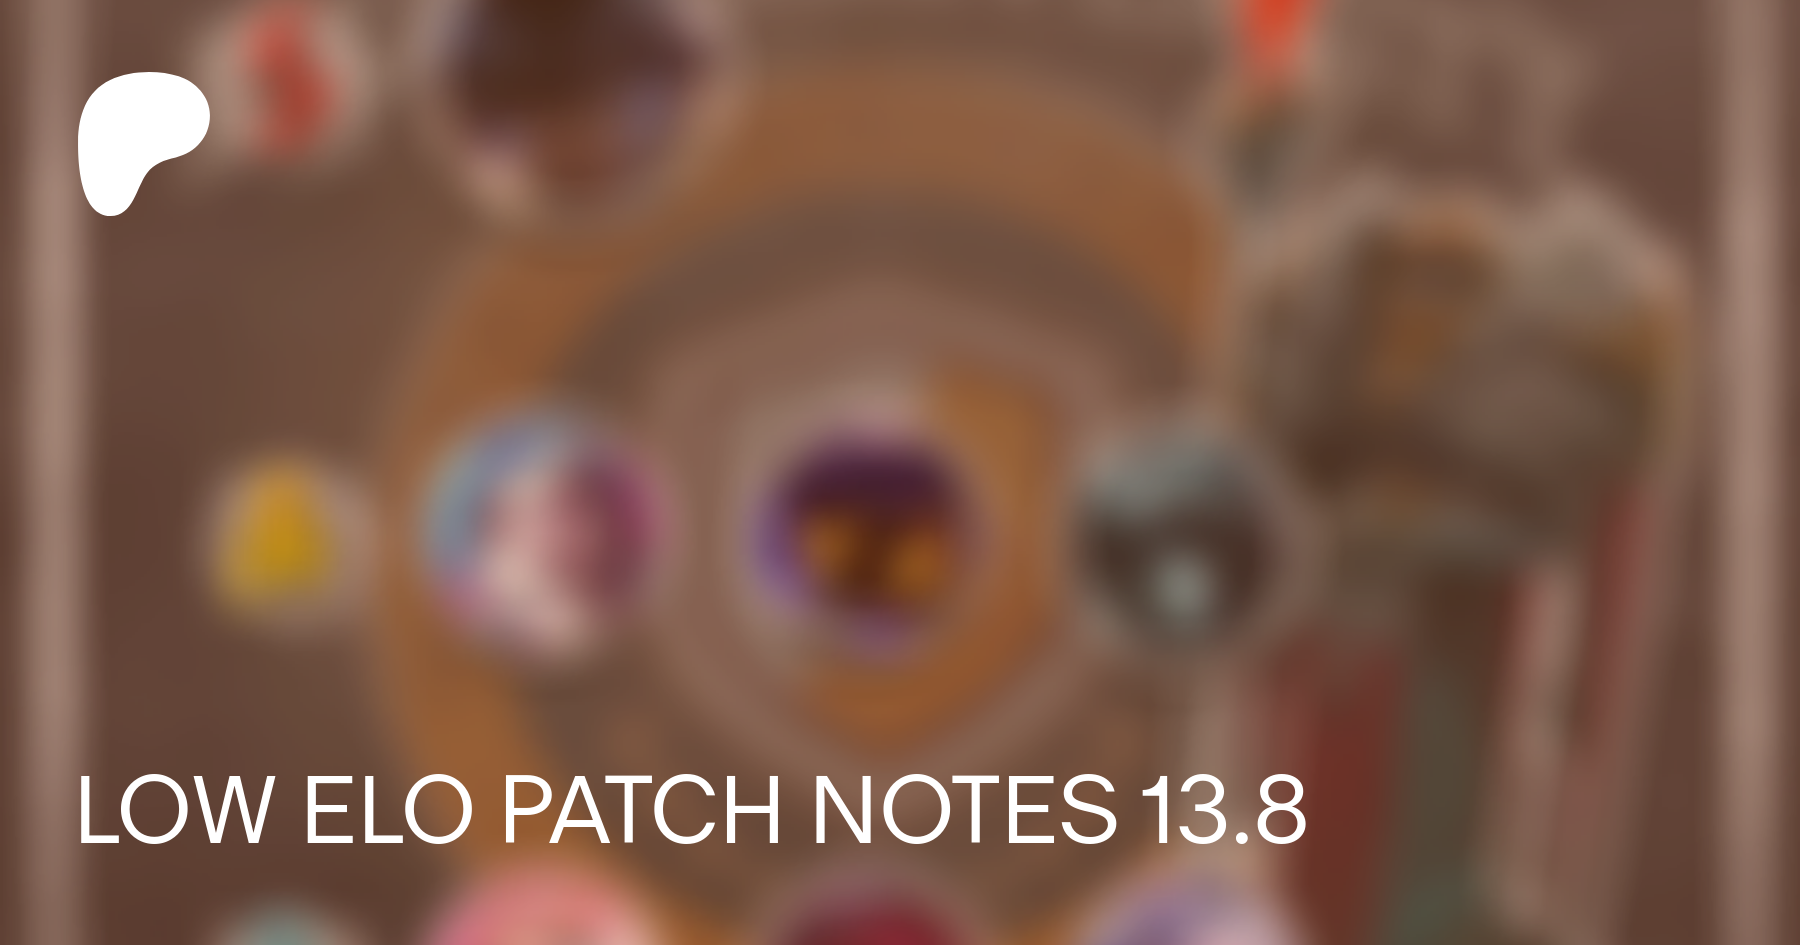 Patch 13.8 notes